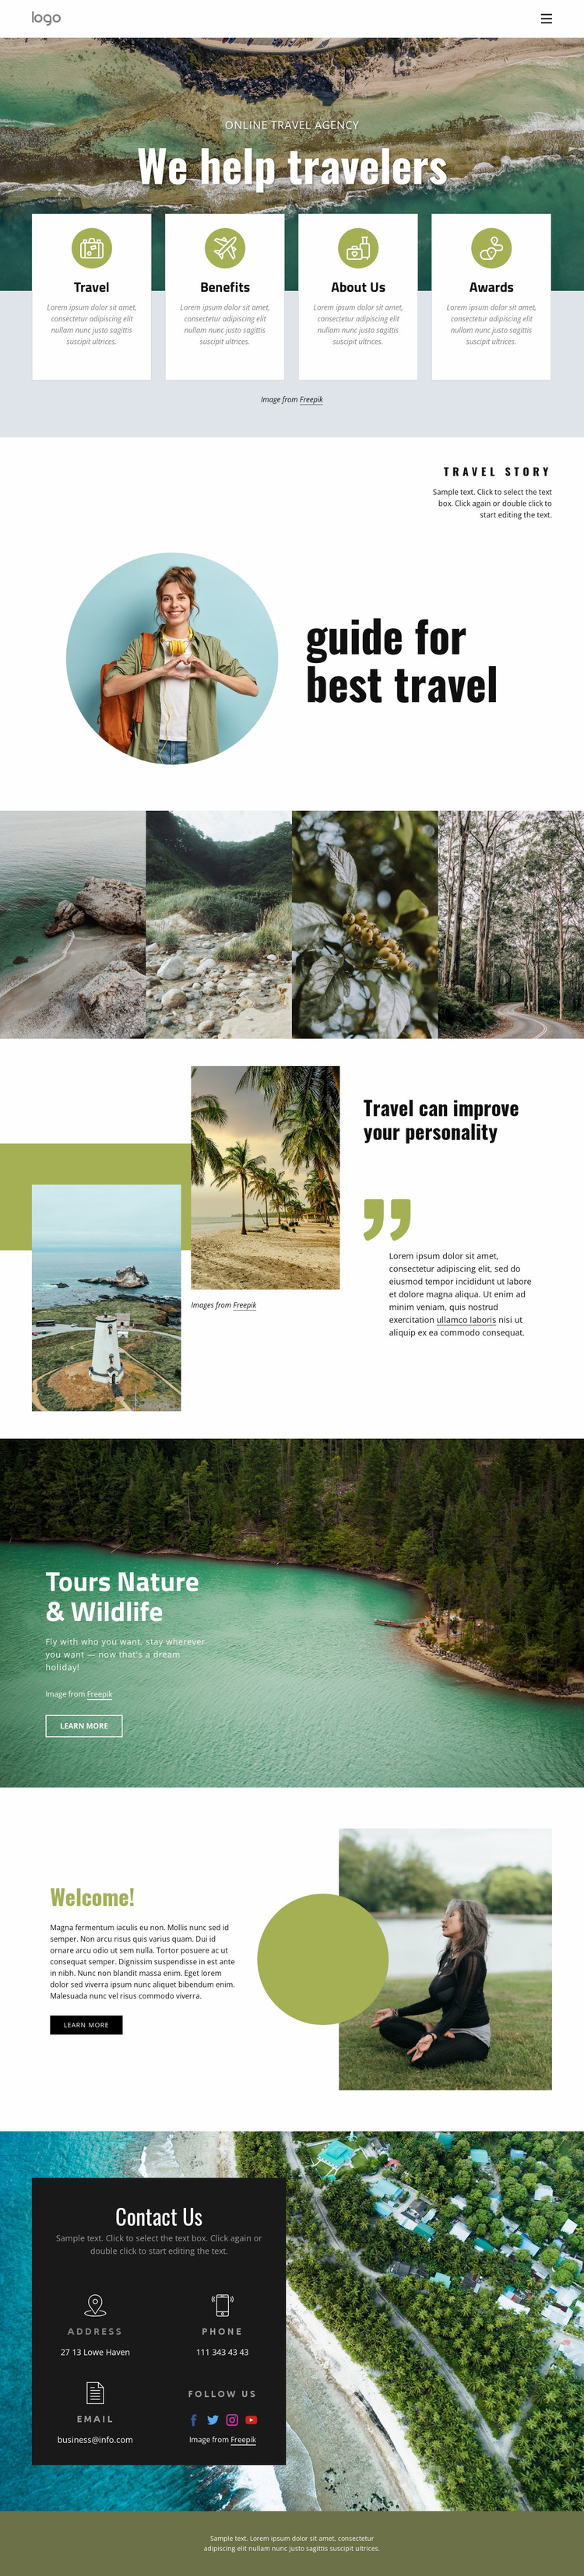 We help manage your trip Website Template